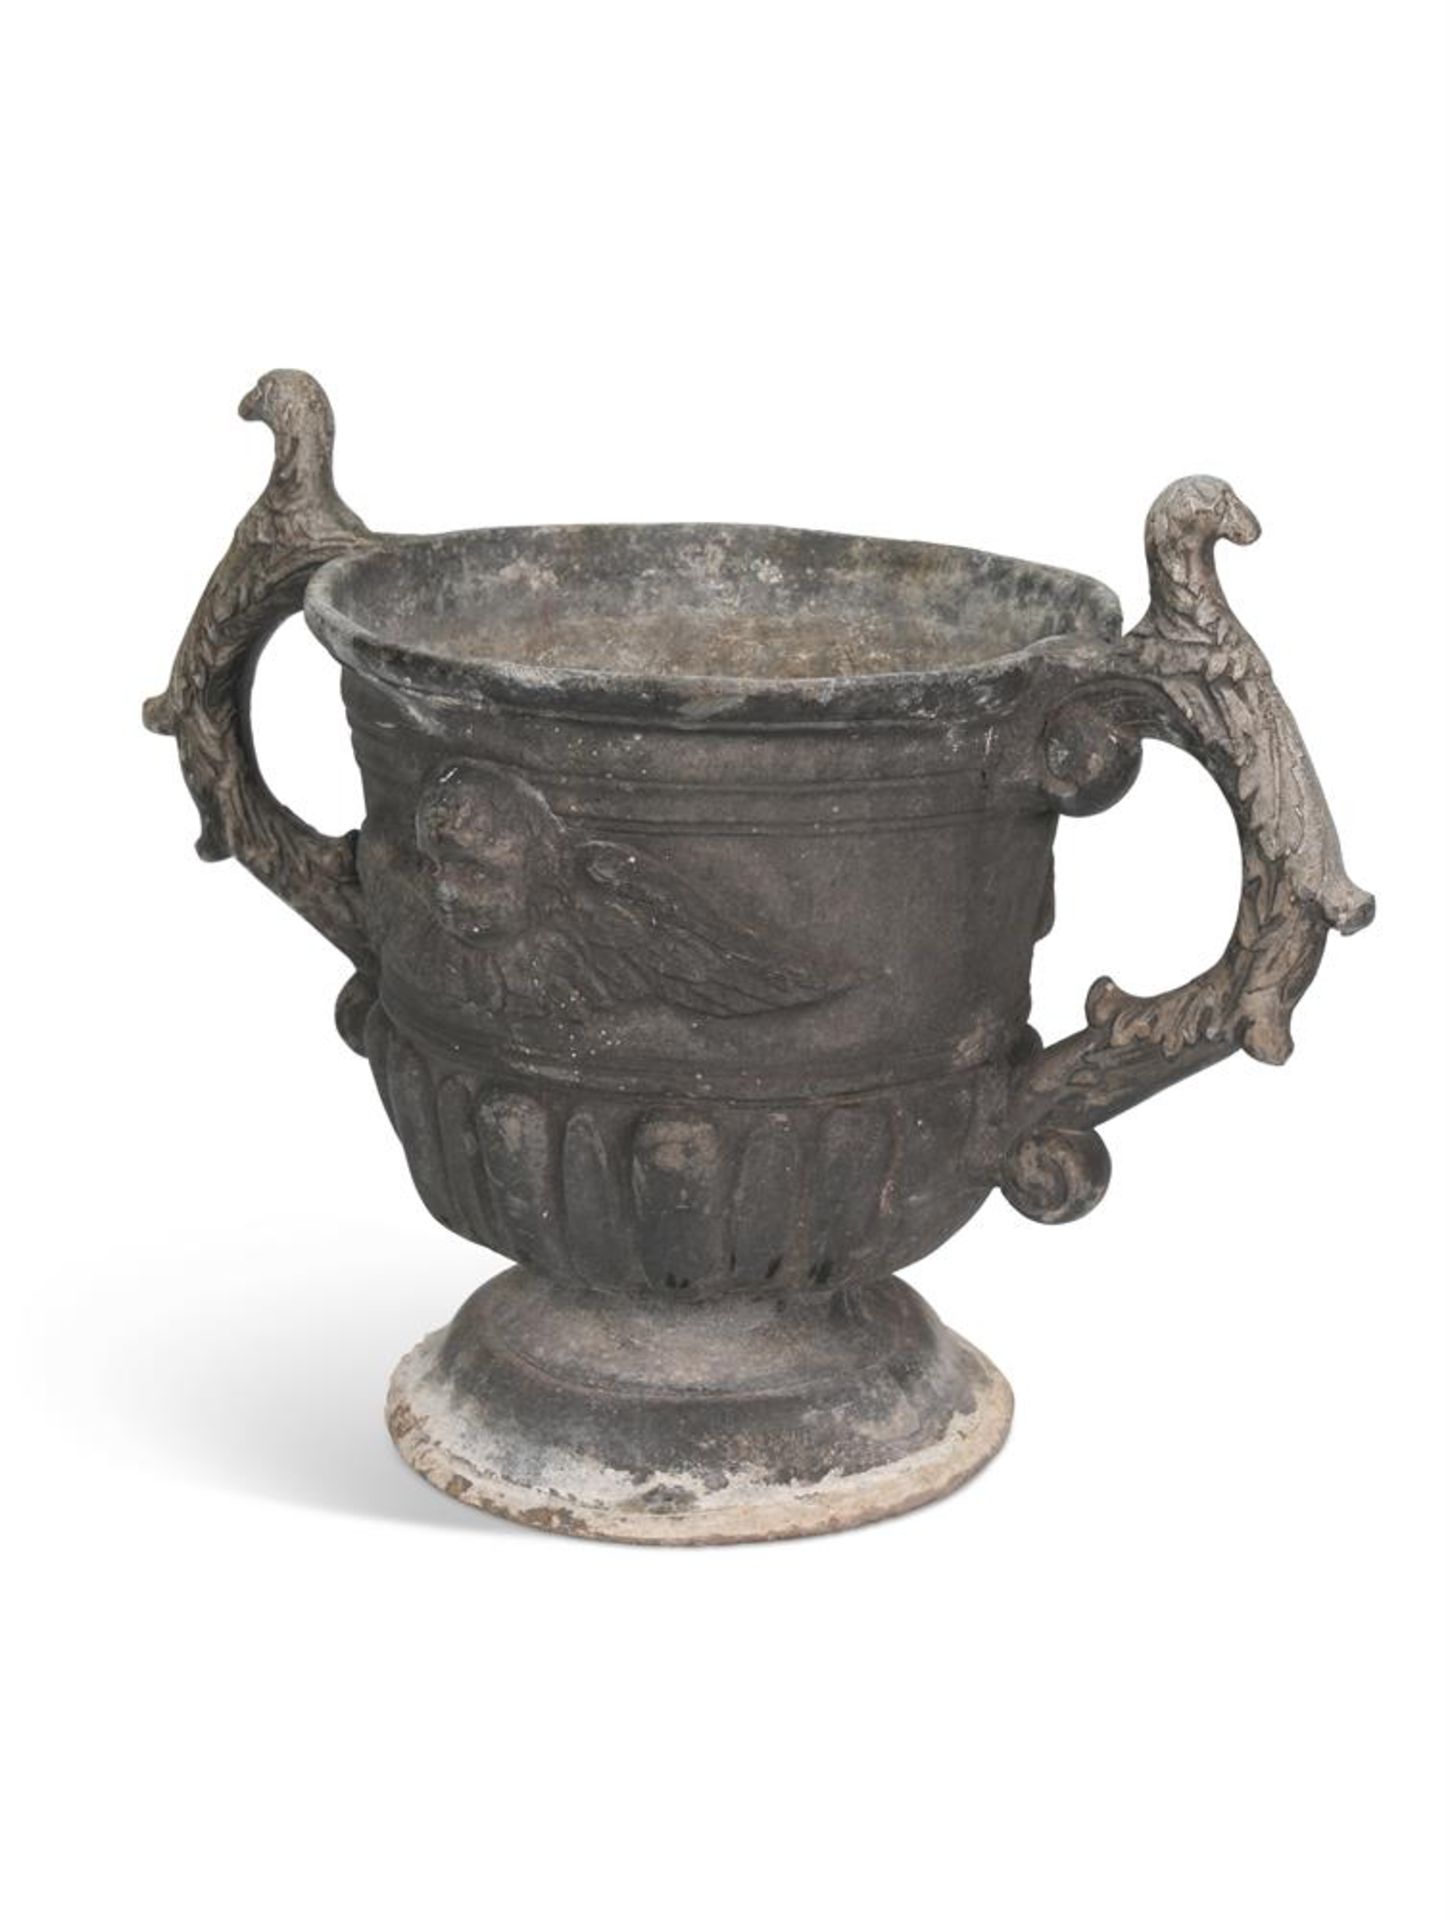 A CAST LEAD TWIN HANDLED URN, 18TH OR EARLY 19TH CENTURY - Image 2 of 2